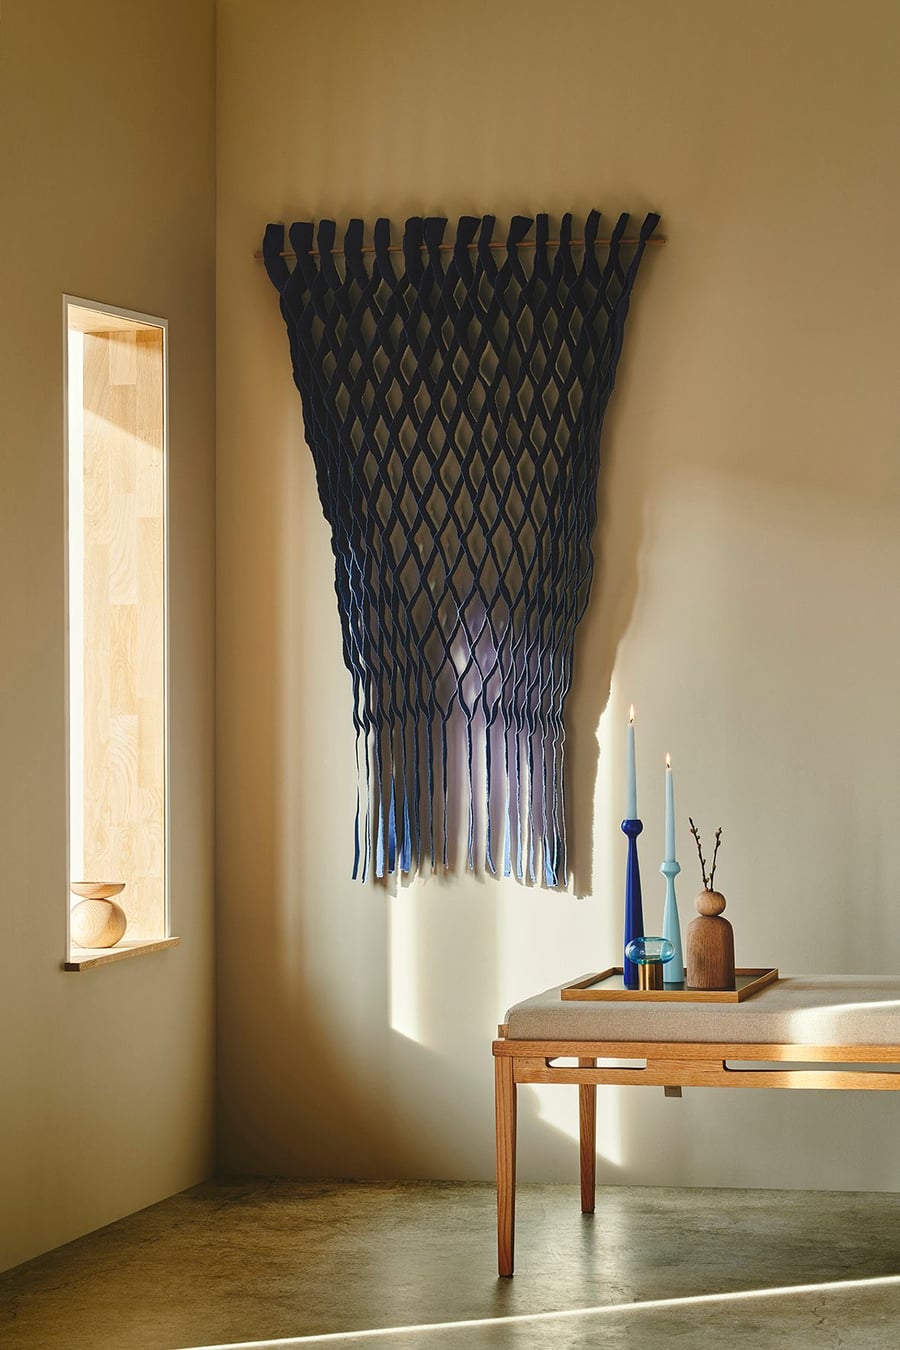 Honeycomb-like hanging textiles from the FLOW collection bring splashes of color and elegance to a modern living space.